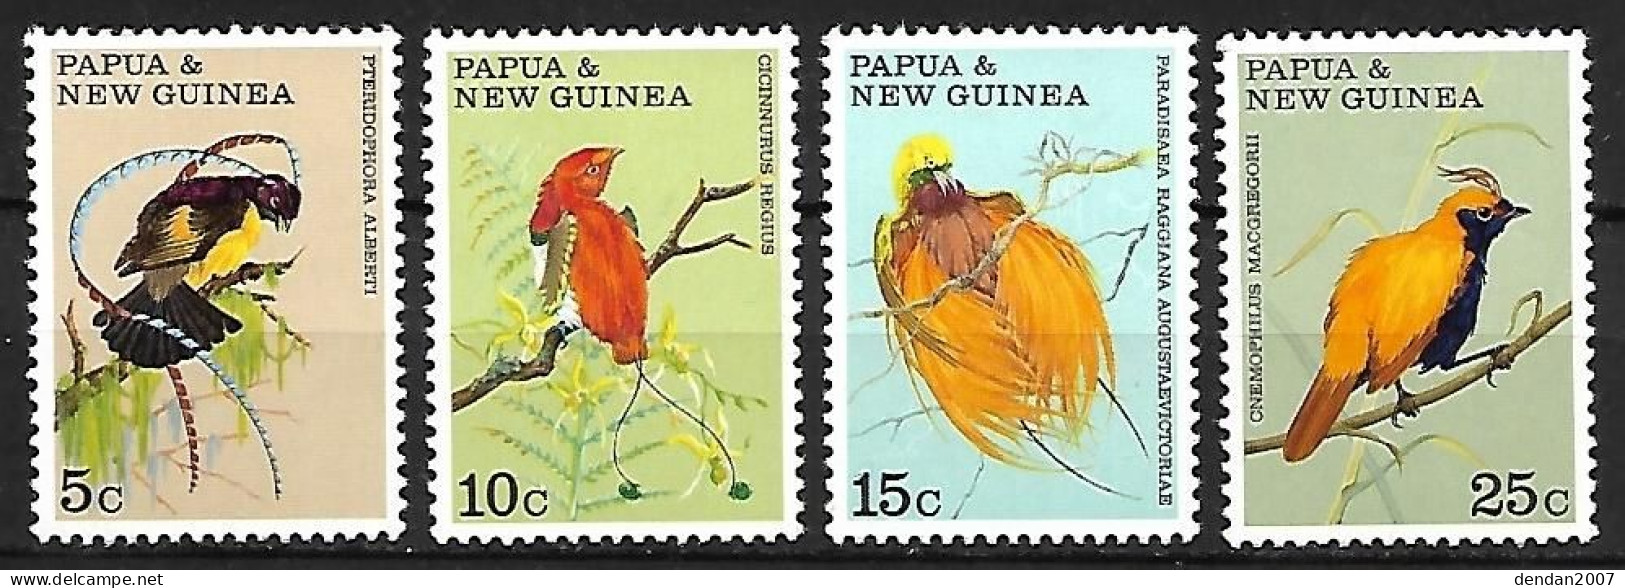 Papua New Guinea - MNH ** 1964 - Complete Set : 4 Different Birds-of-paradise - Songbirds & Tree Dwellers